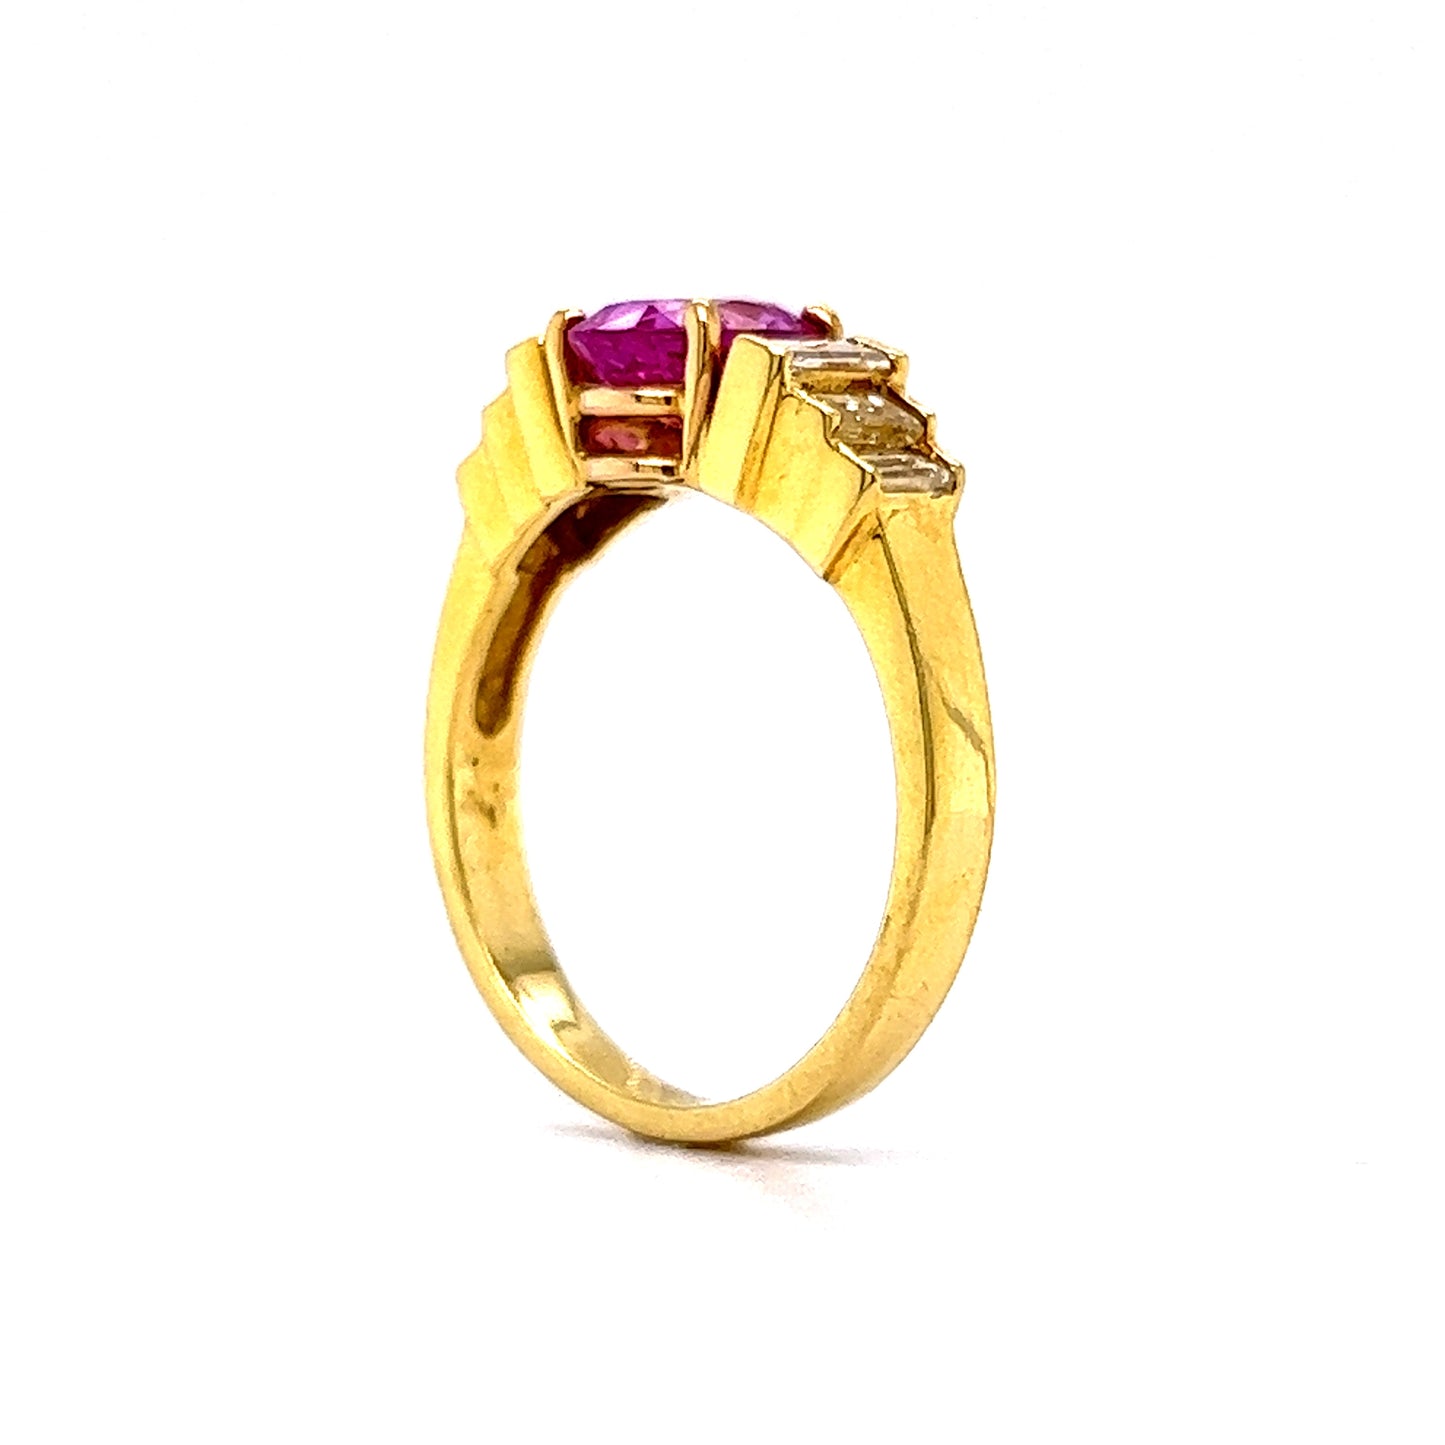 1.70 Oval Cut Pink Sapphire Engagement Ring in 14k Yellow Gold